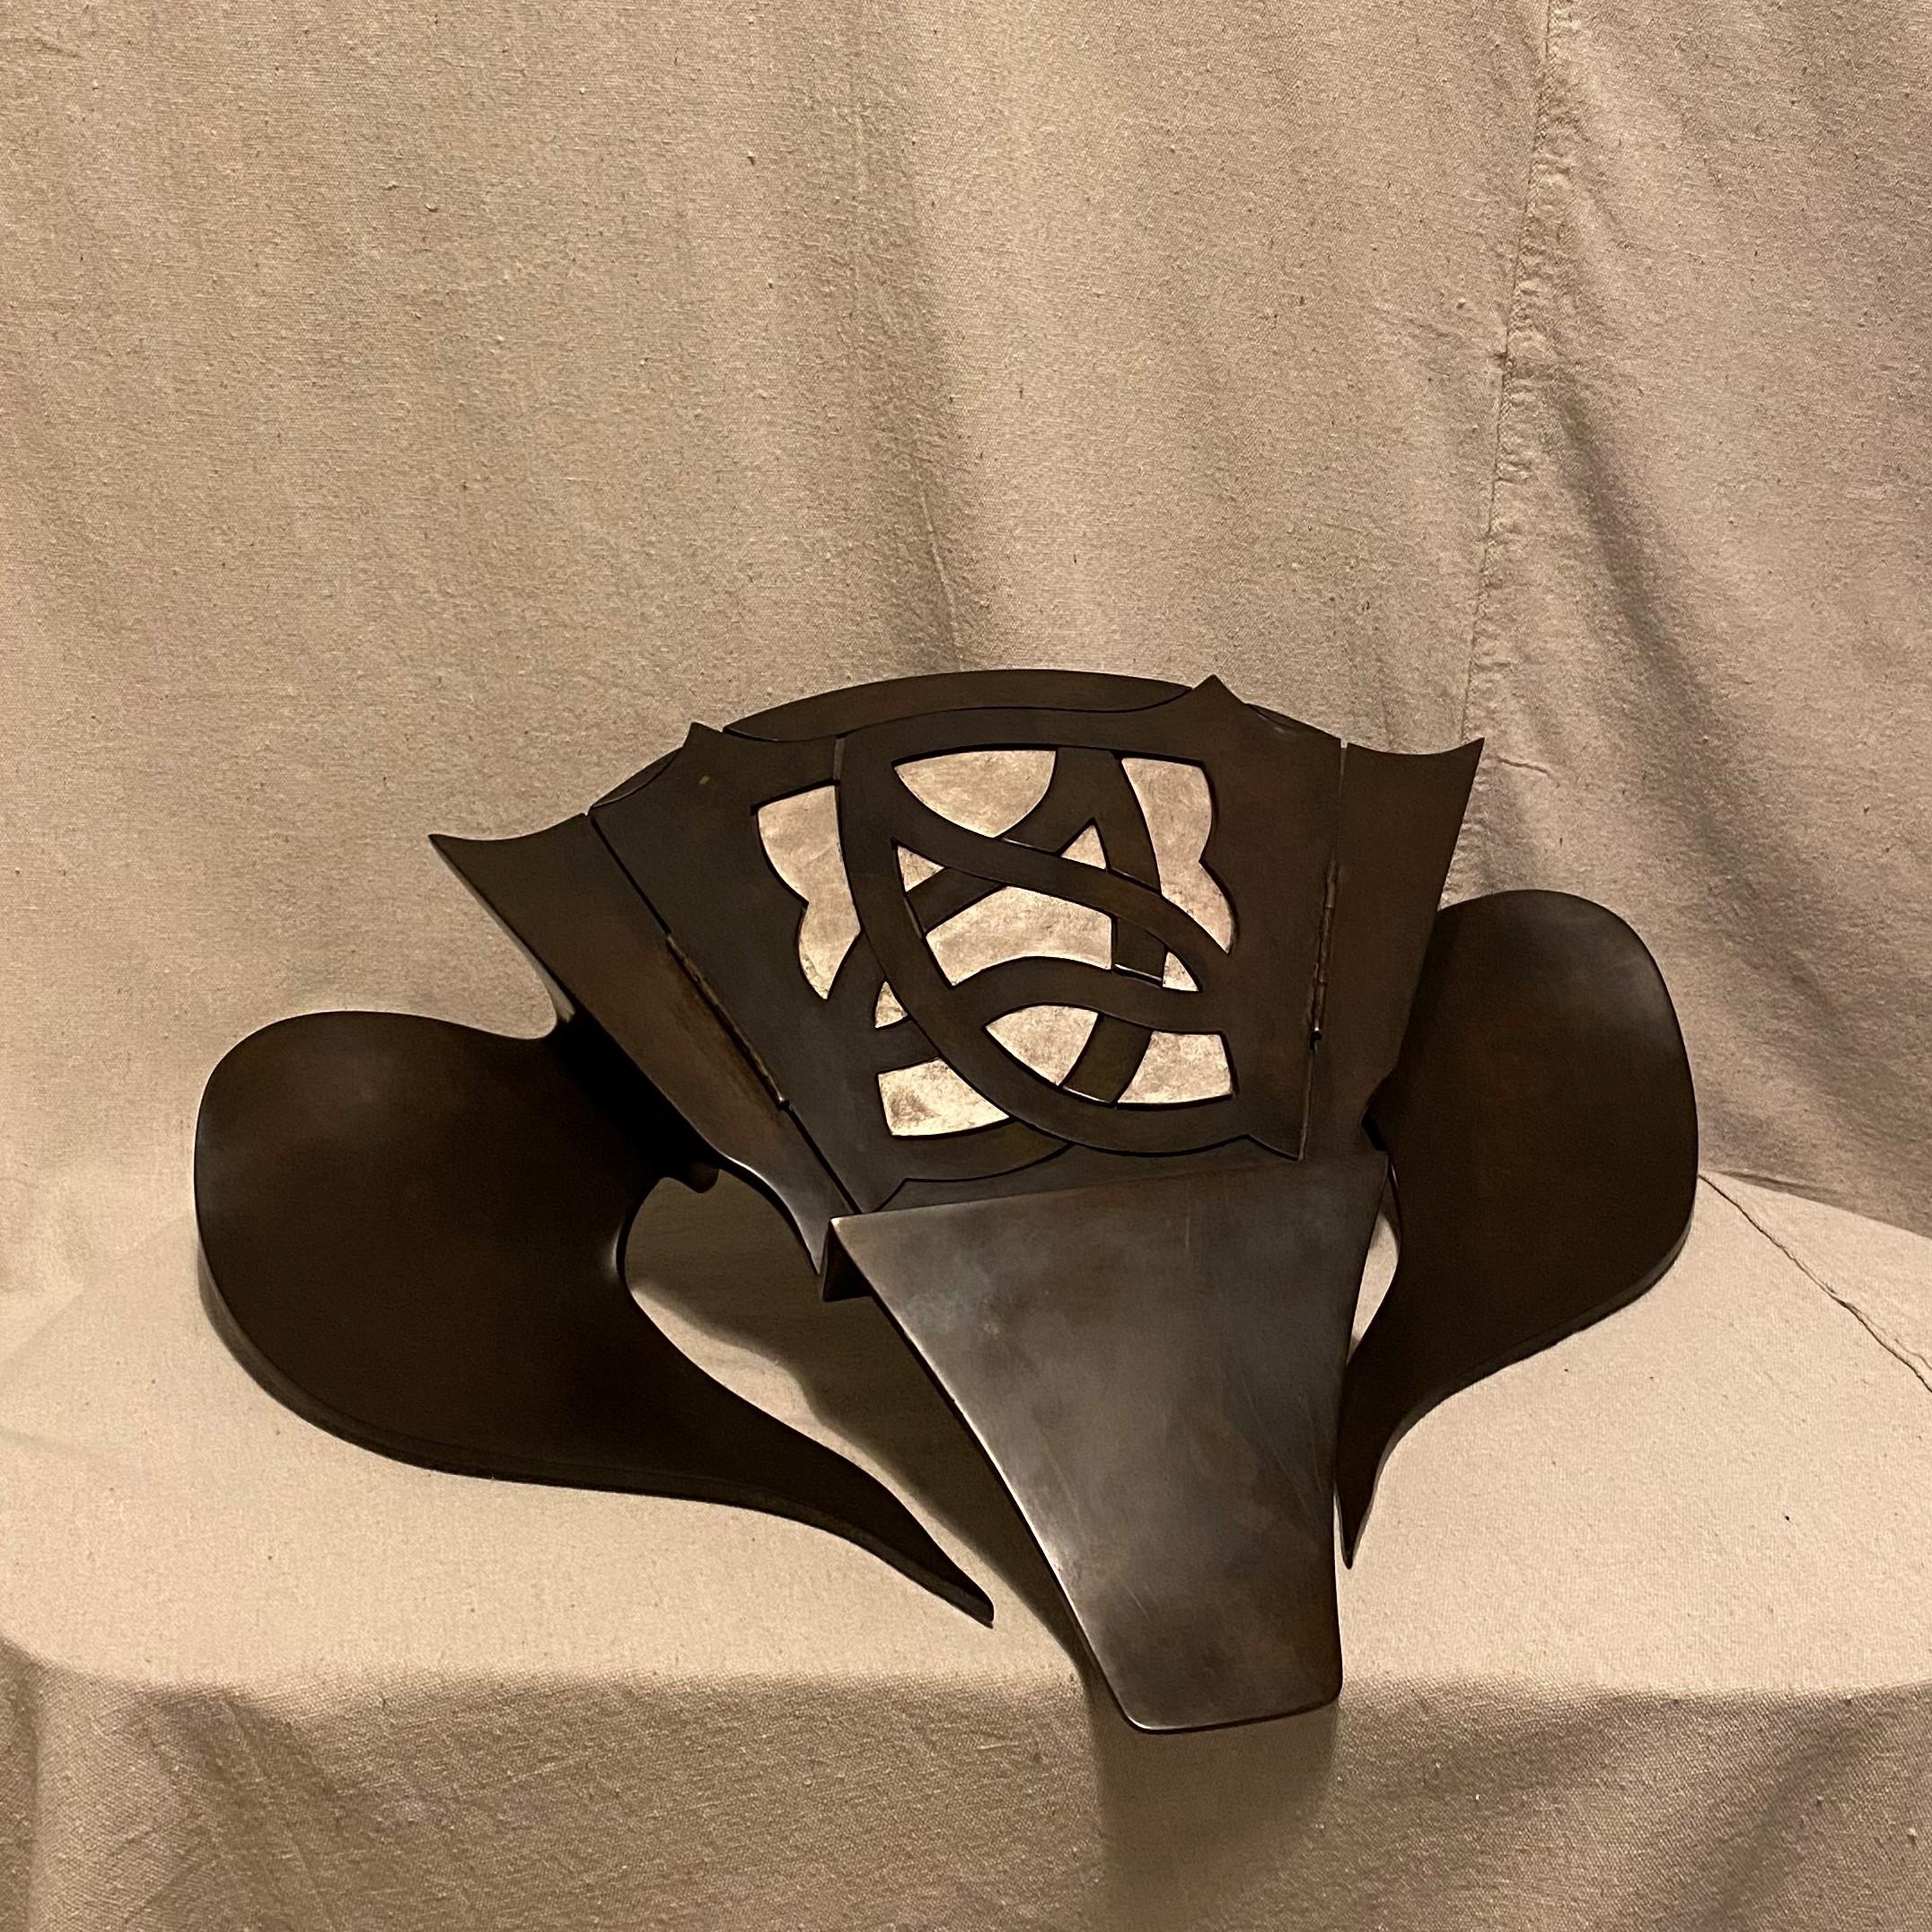 Inspired by the clever fox and the fascinating bat, the cast bronze lectern sculpture is one of three such designs by designer/artist Dana Nicholson. Sculpturally it stands on its own but it also elegantly supports art books or small drawings and